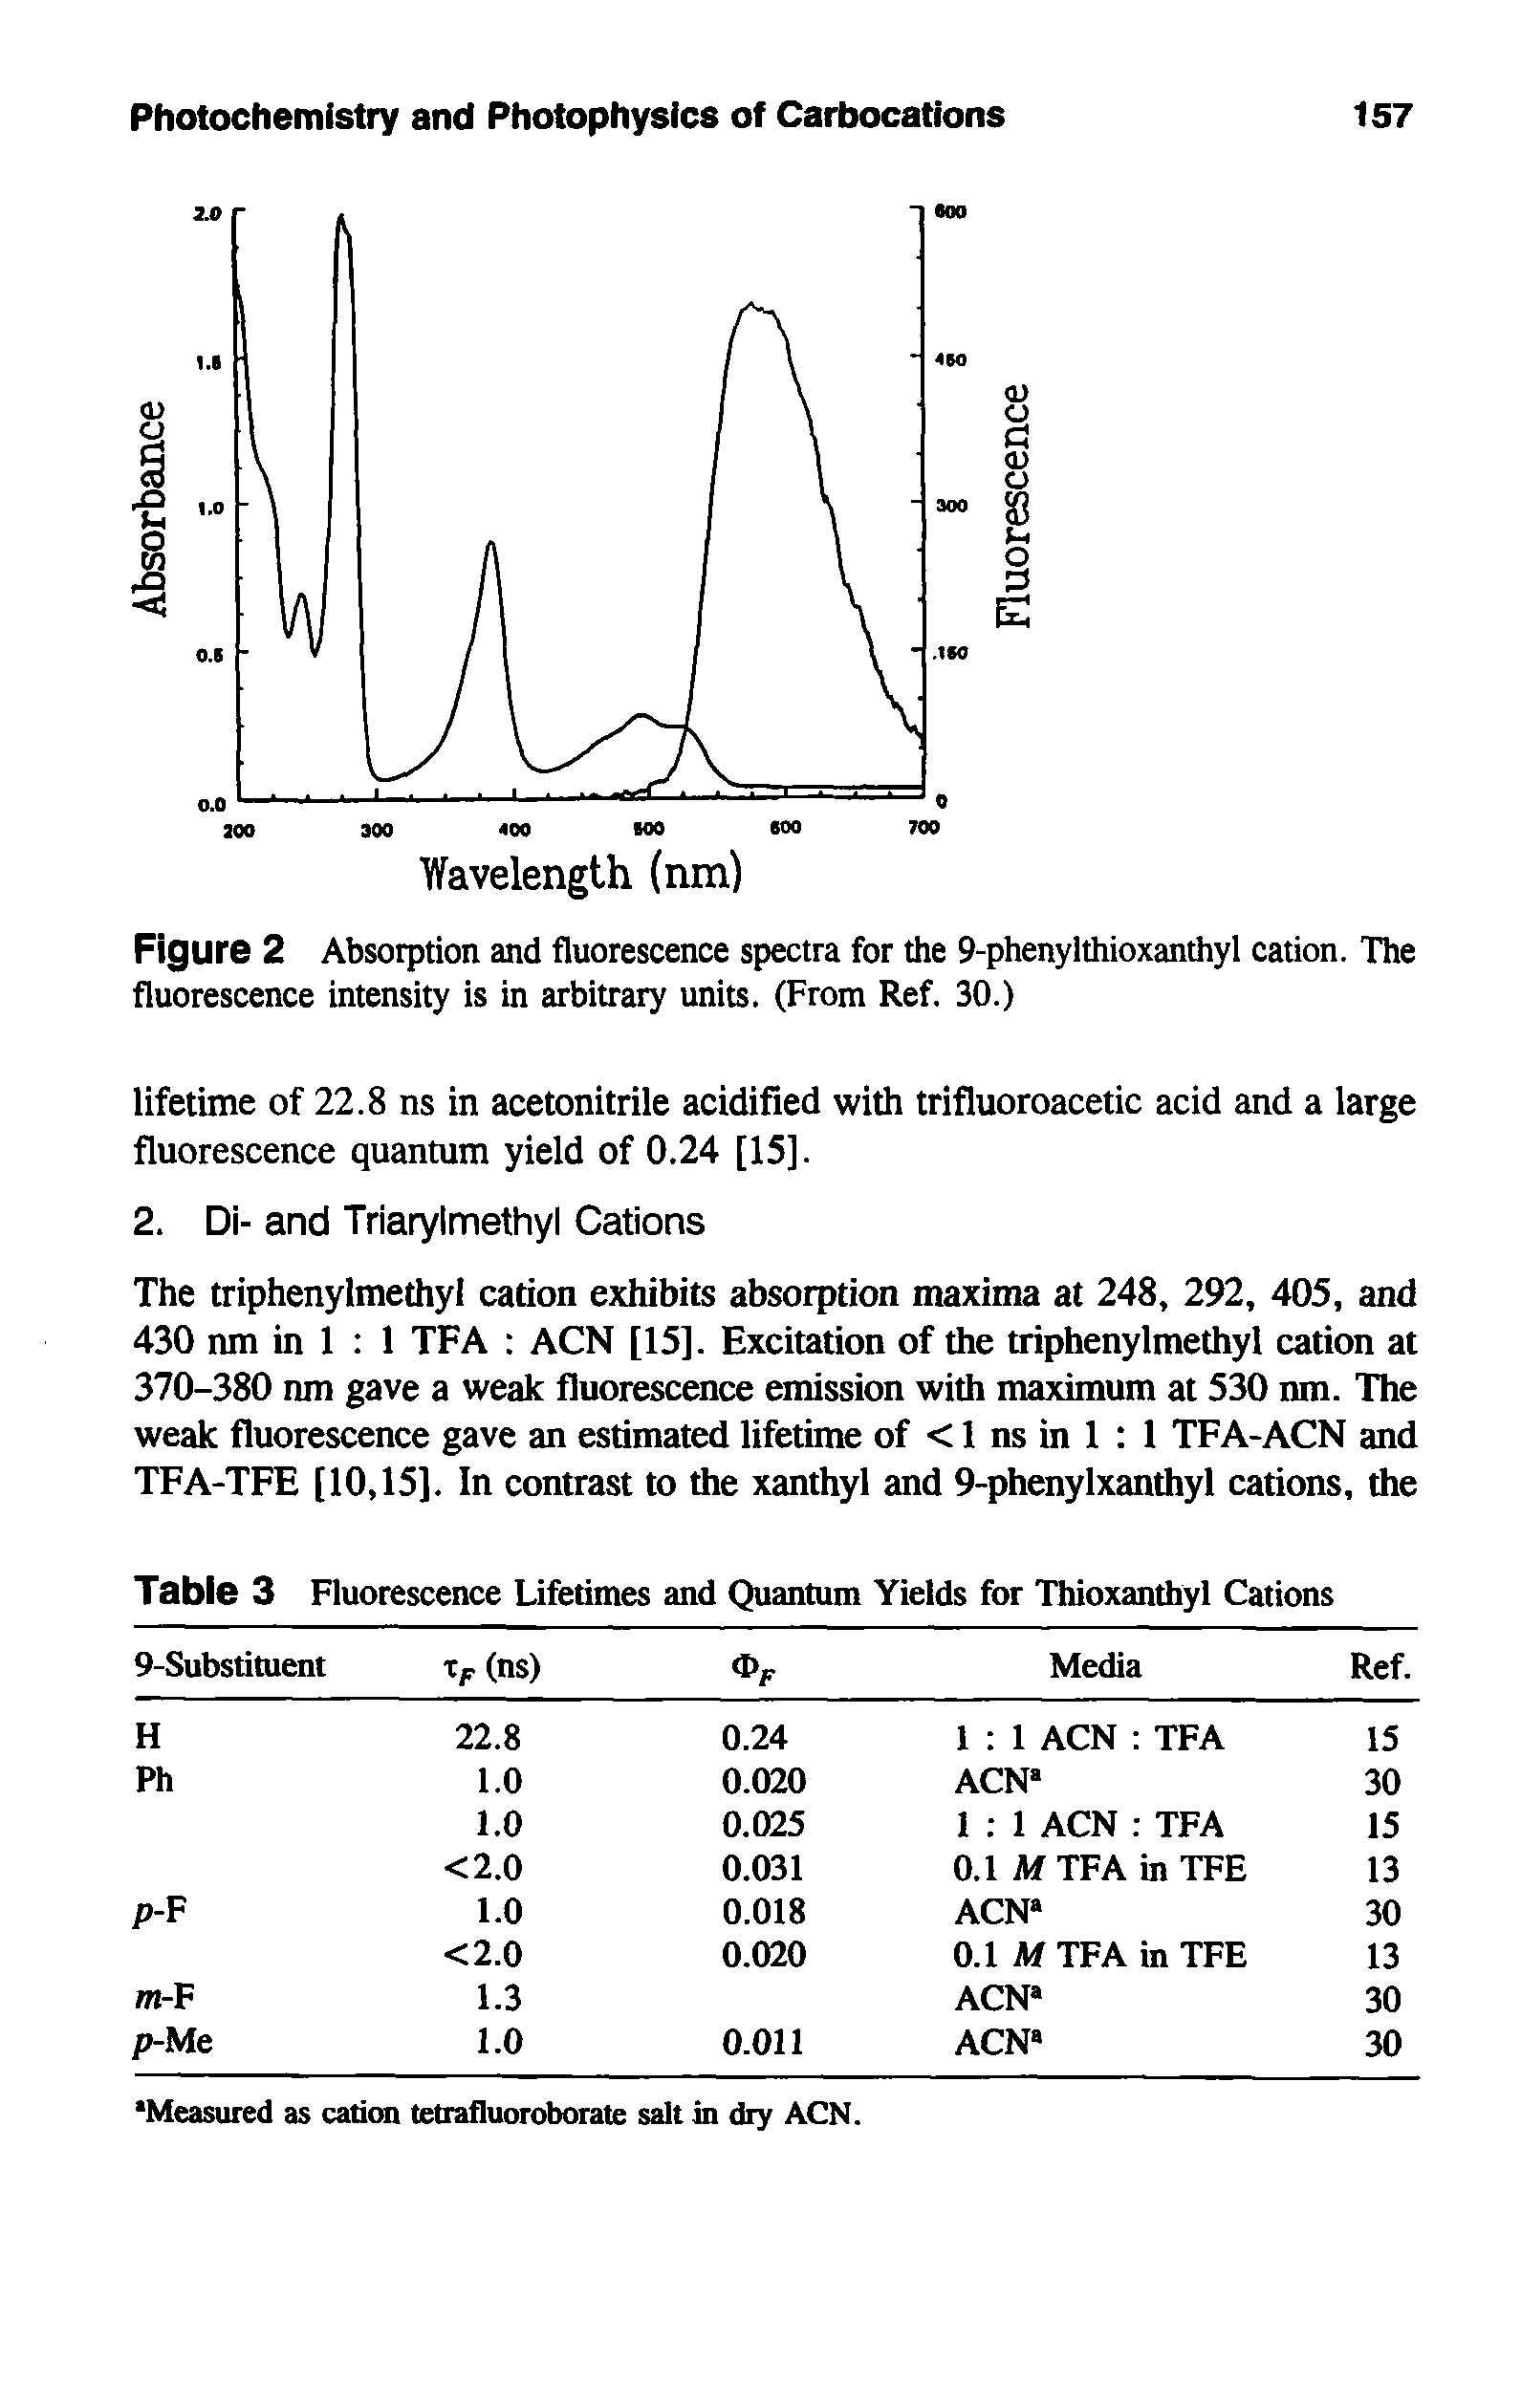 Table 3 Fluorescence Lifetimes and Quantum Yields for Thioxanthyl Cations...